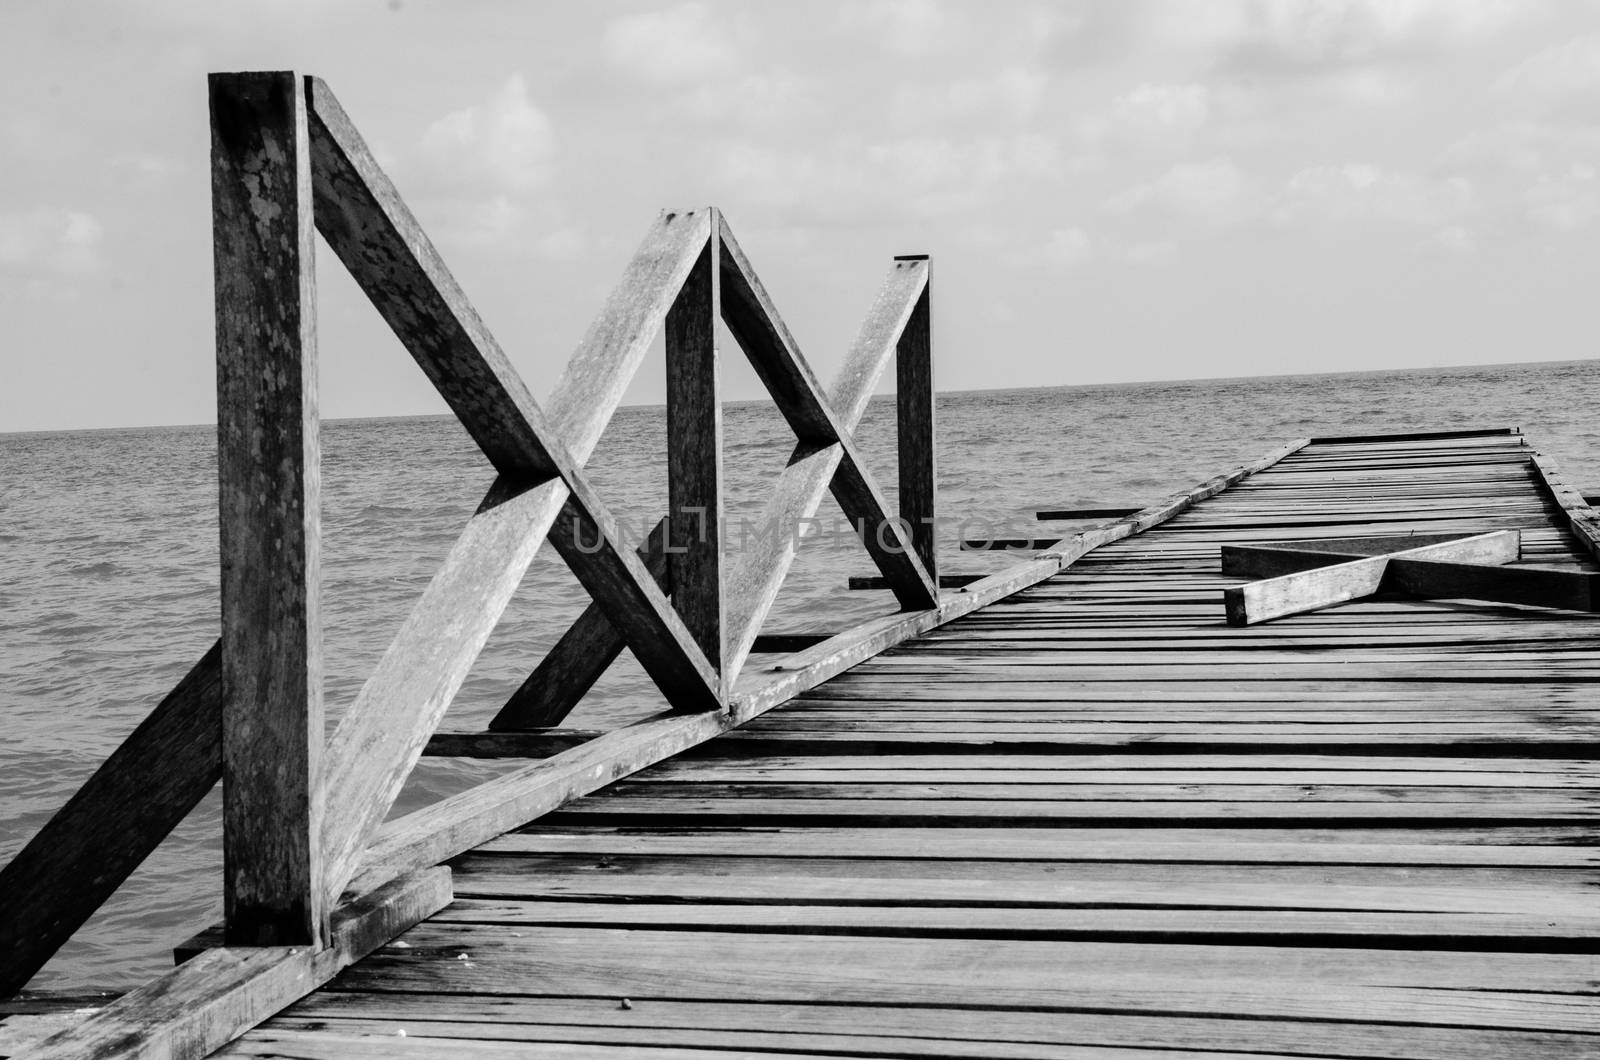 Penang island Malaysia. Wooden pier on the sea background, destroyed bridge near tropics. Black and white panorama